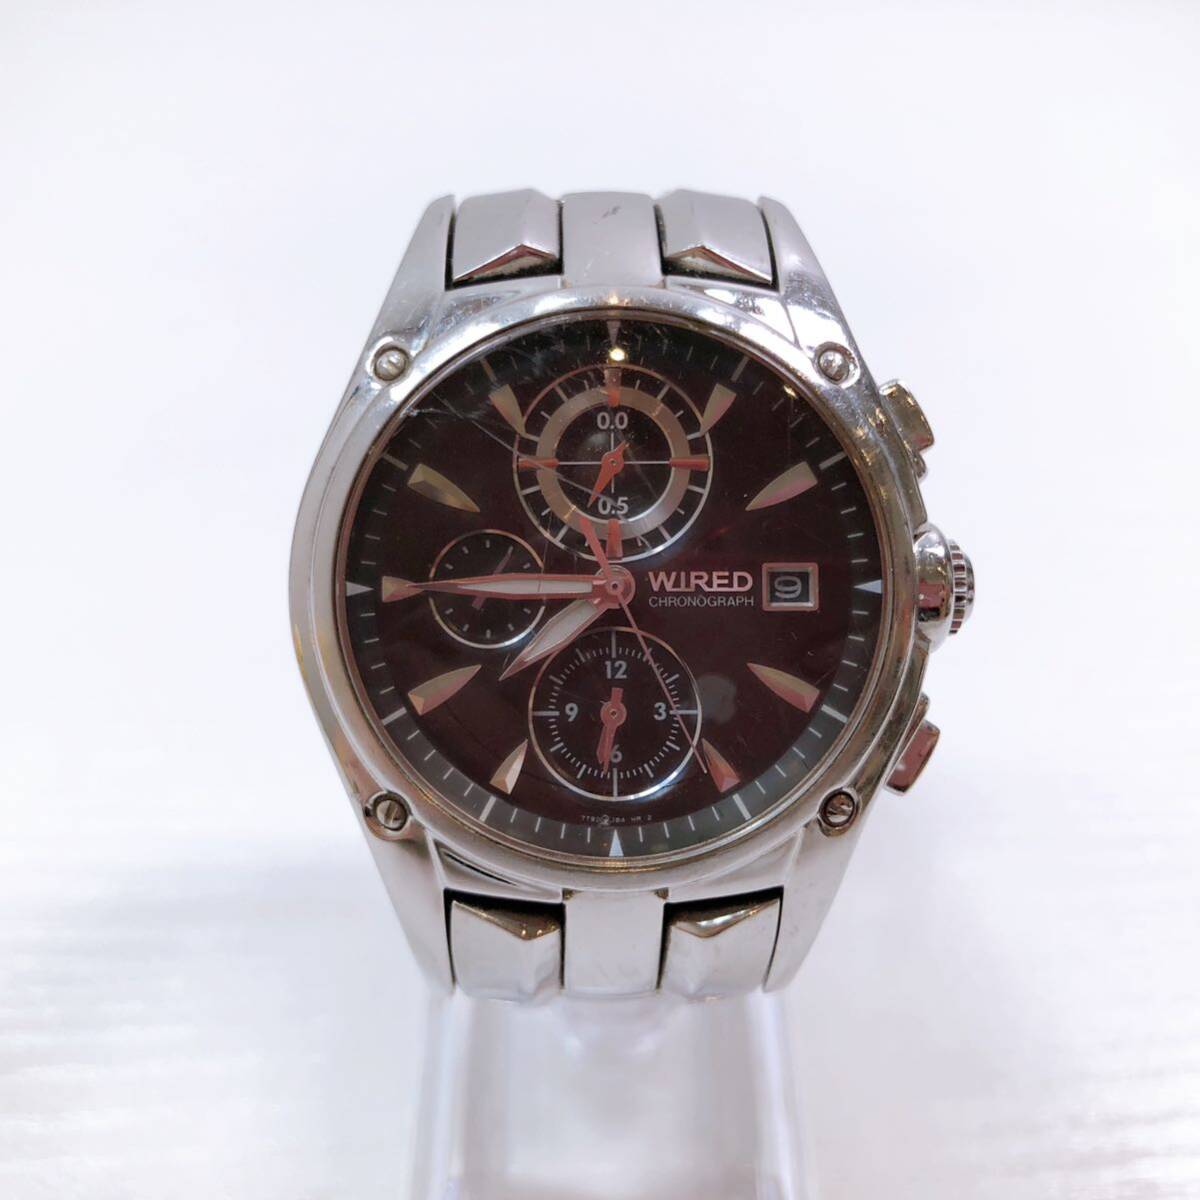 155[ used ]WIRED men's wristwatch 7192-0GK0 Wired silver face wine red chronograph Date Seiko operation not yet verification present condition goods 